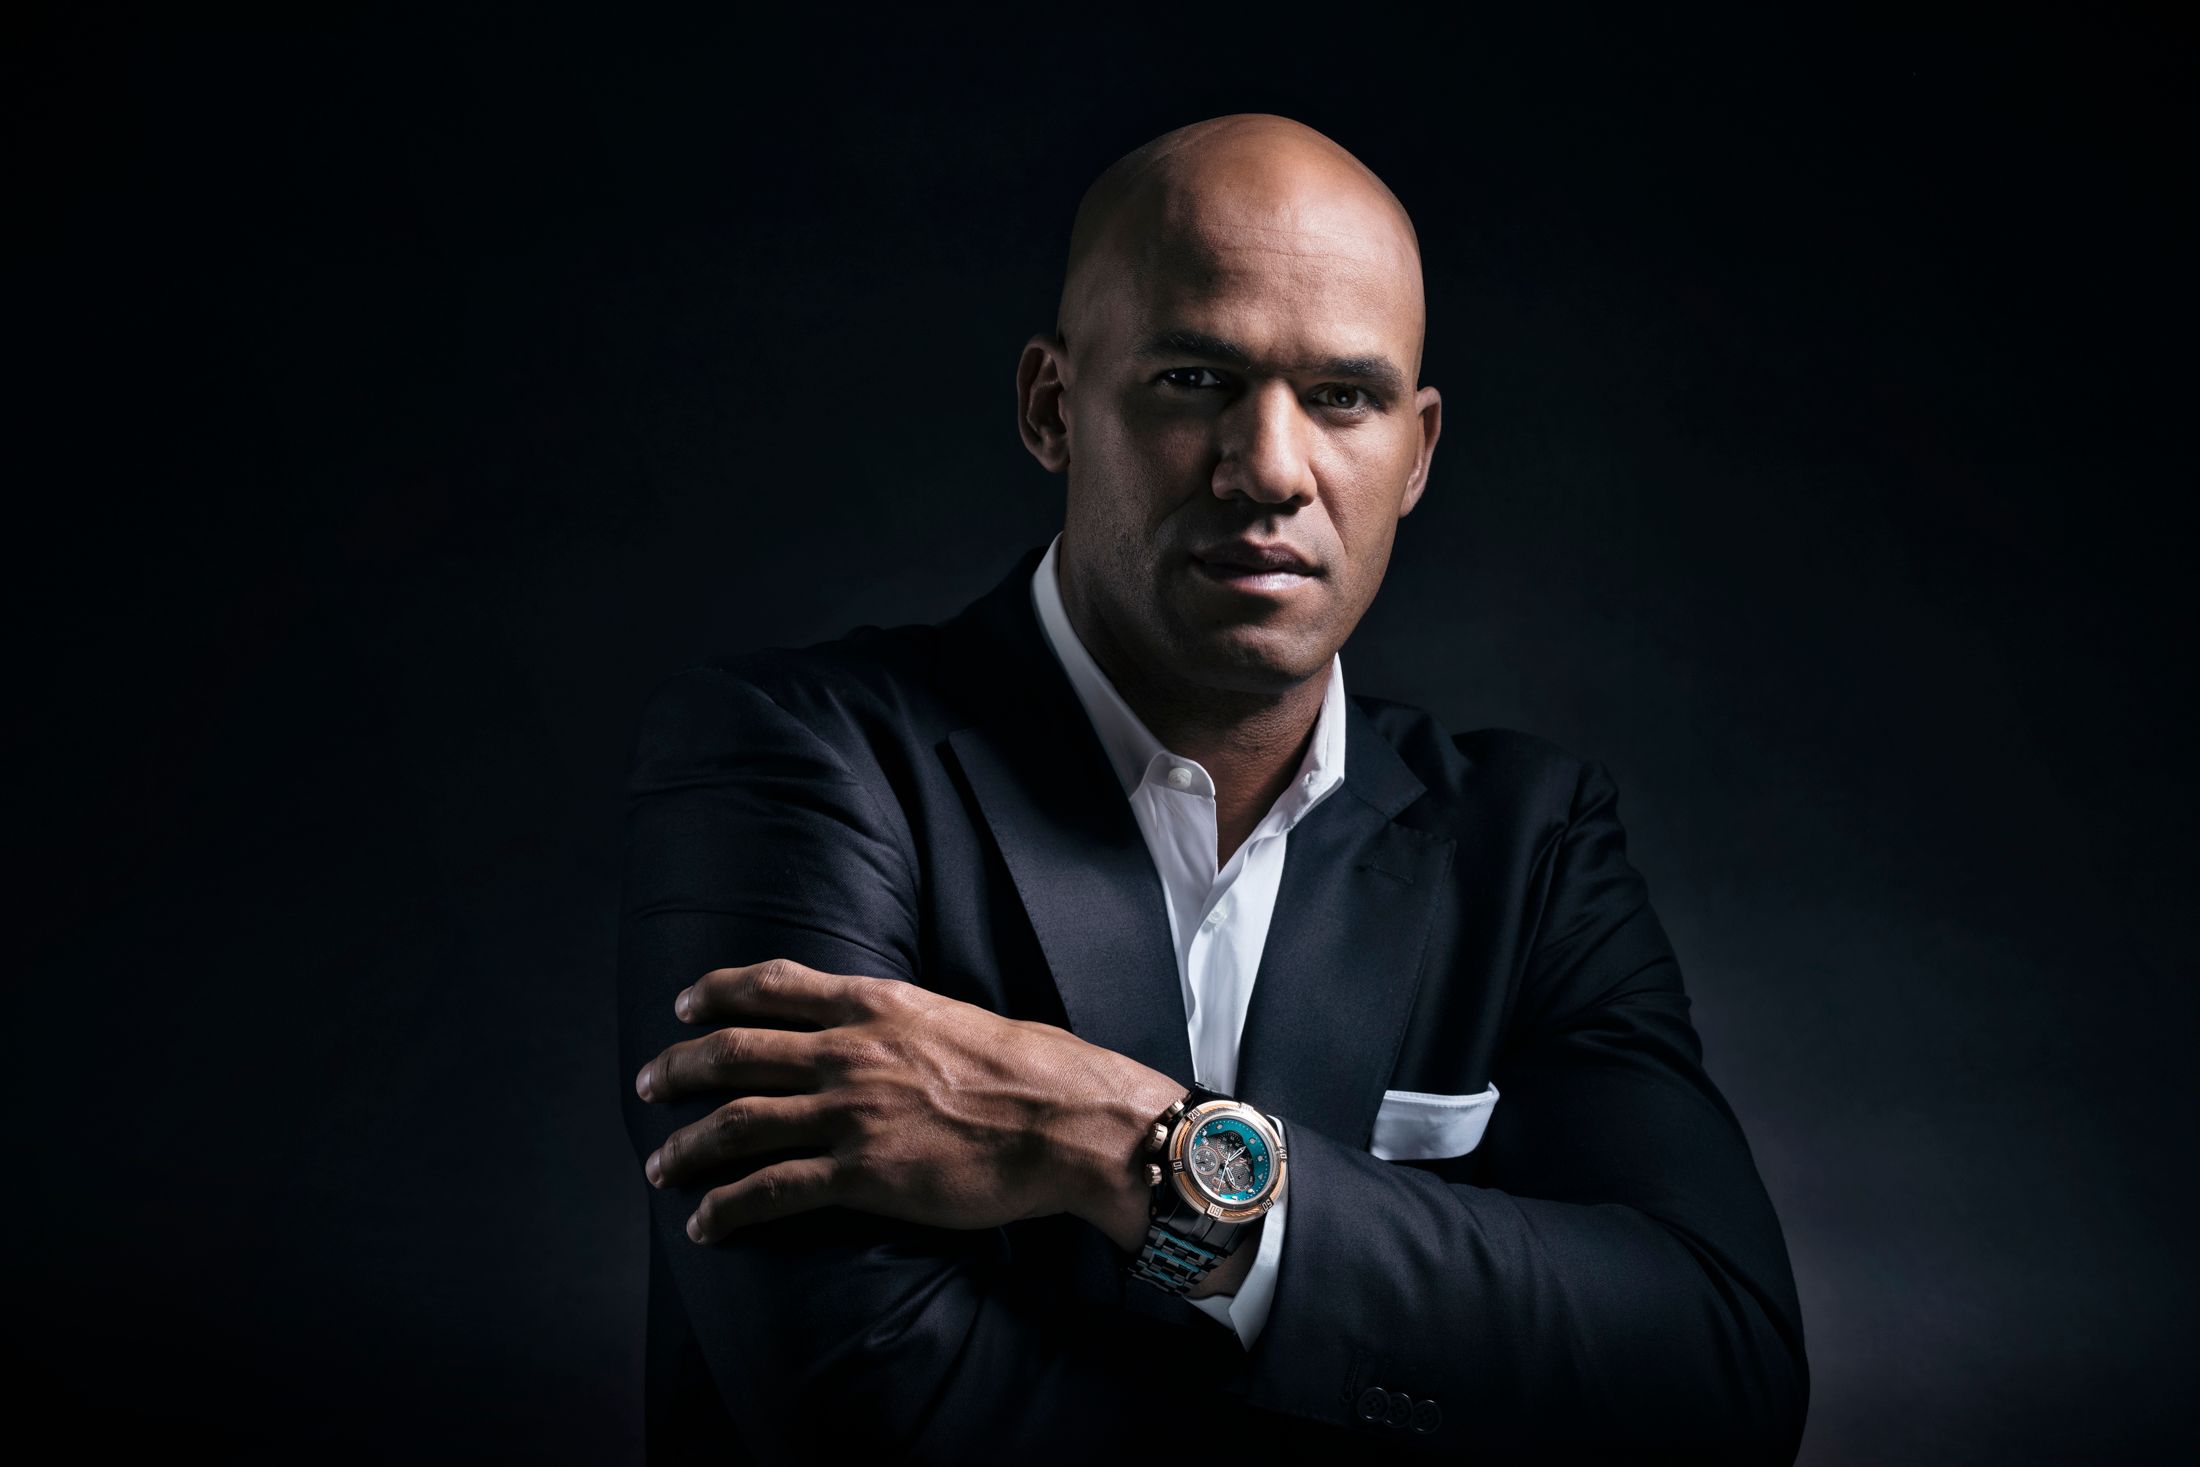 Jason Taylor for Invicta watches